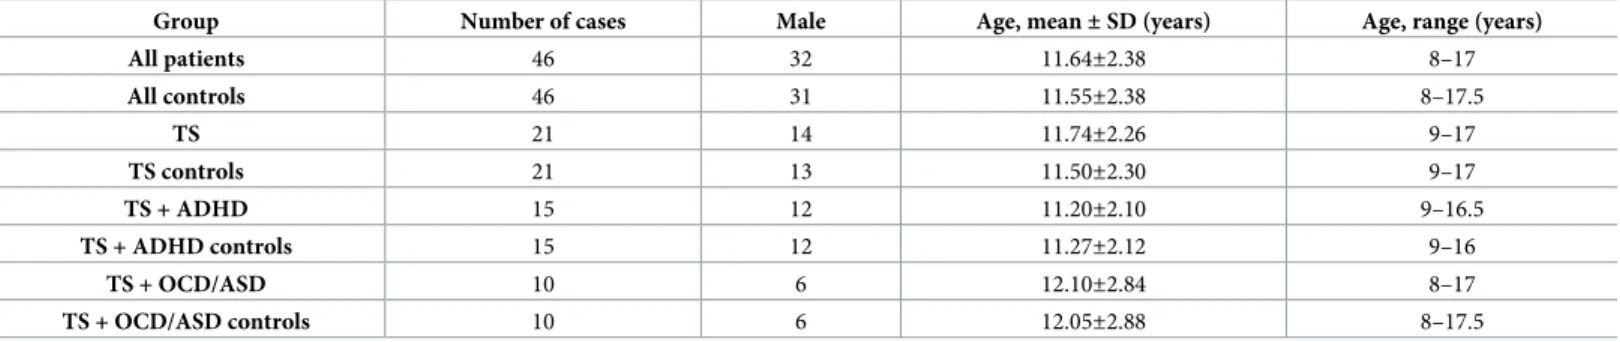 Table 1. Demographic parameters of the investigated groups.